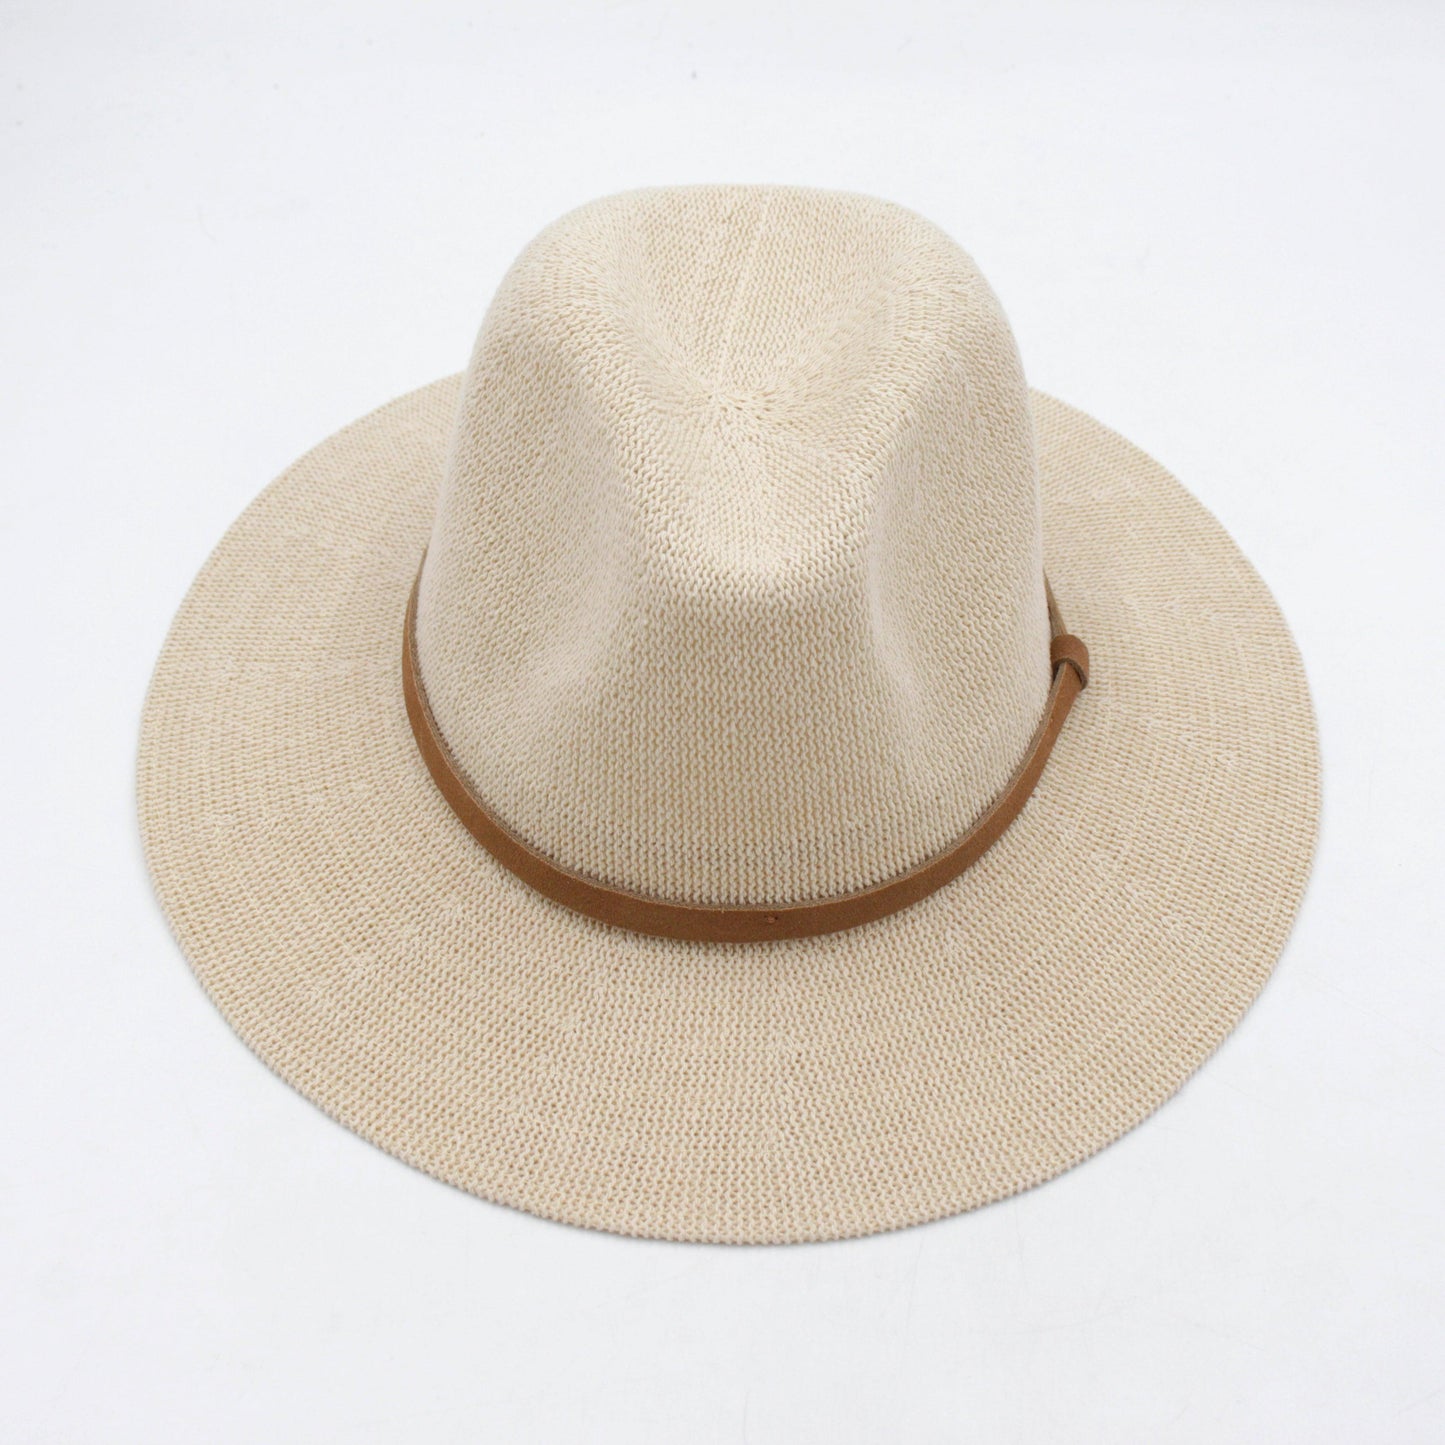 Straw hat front view